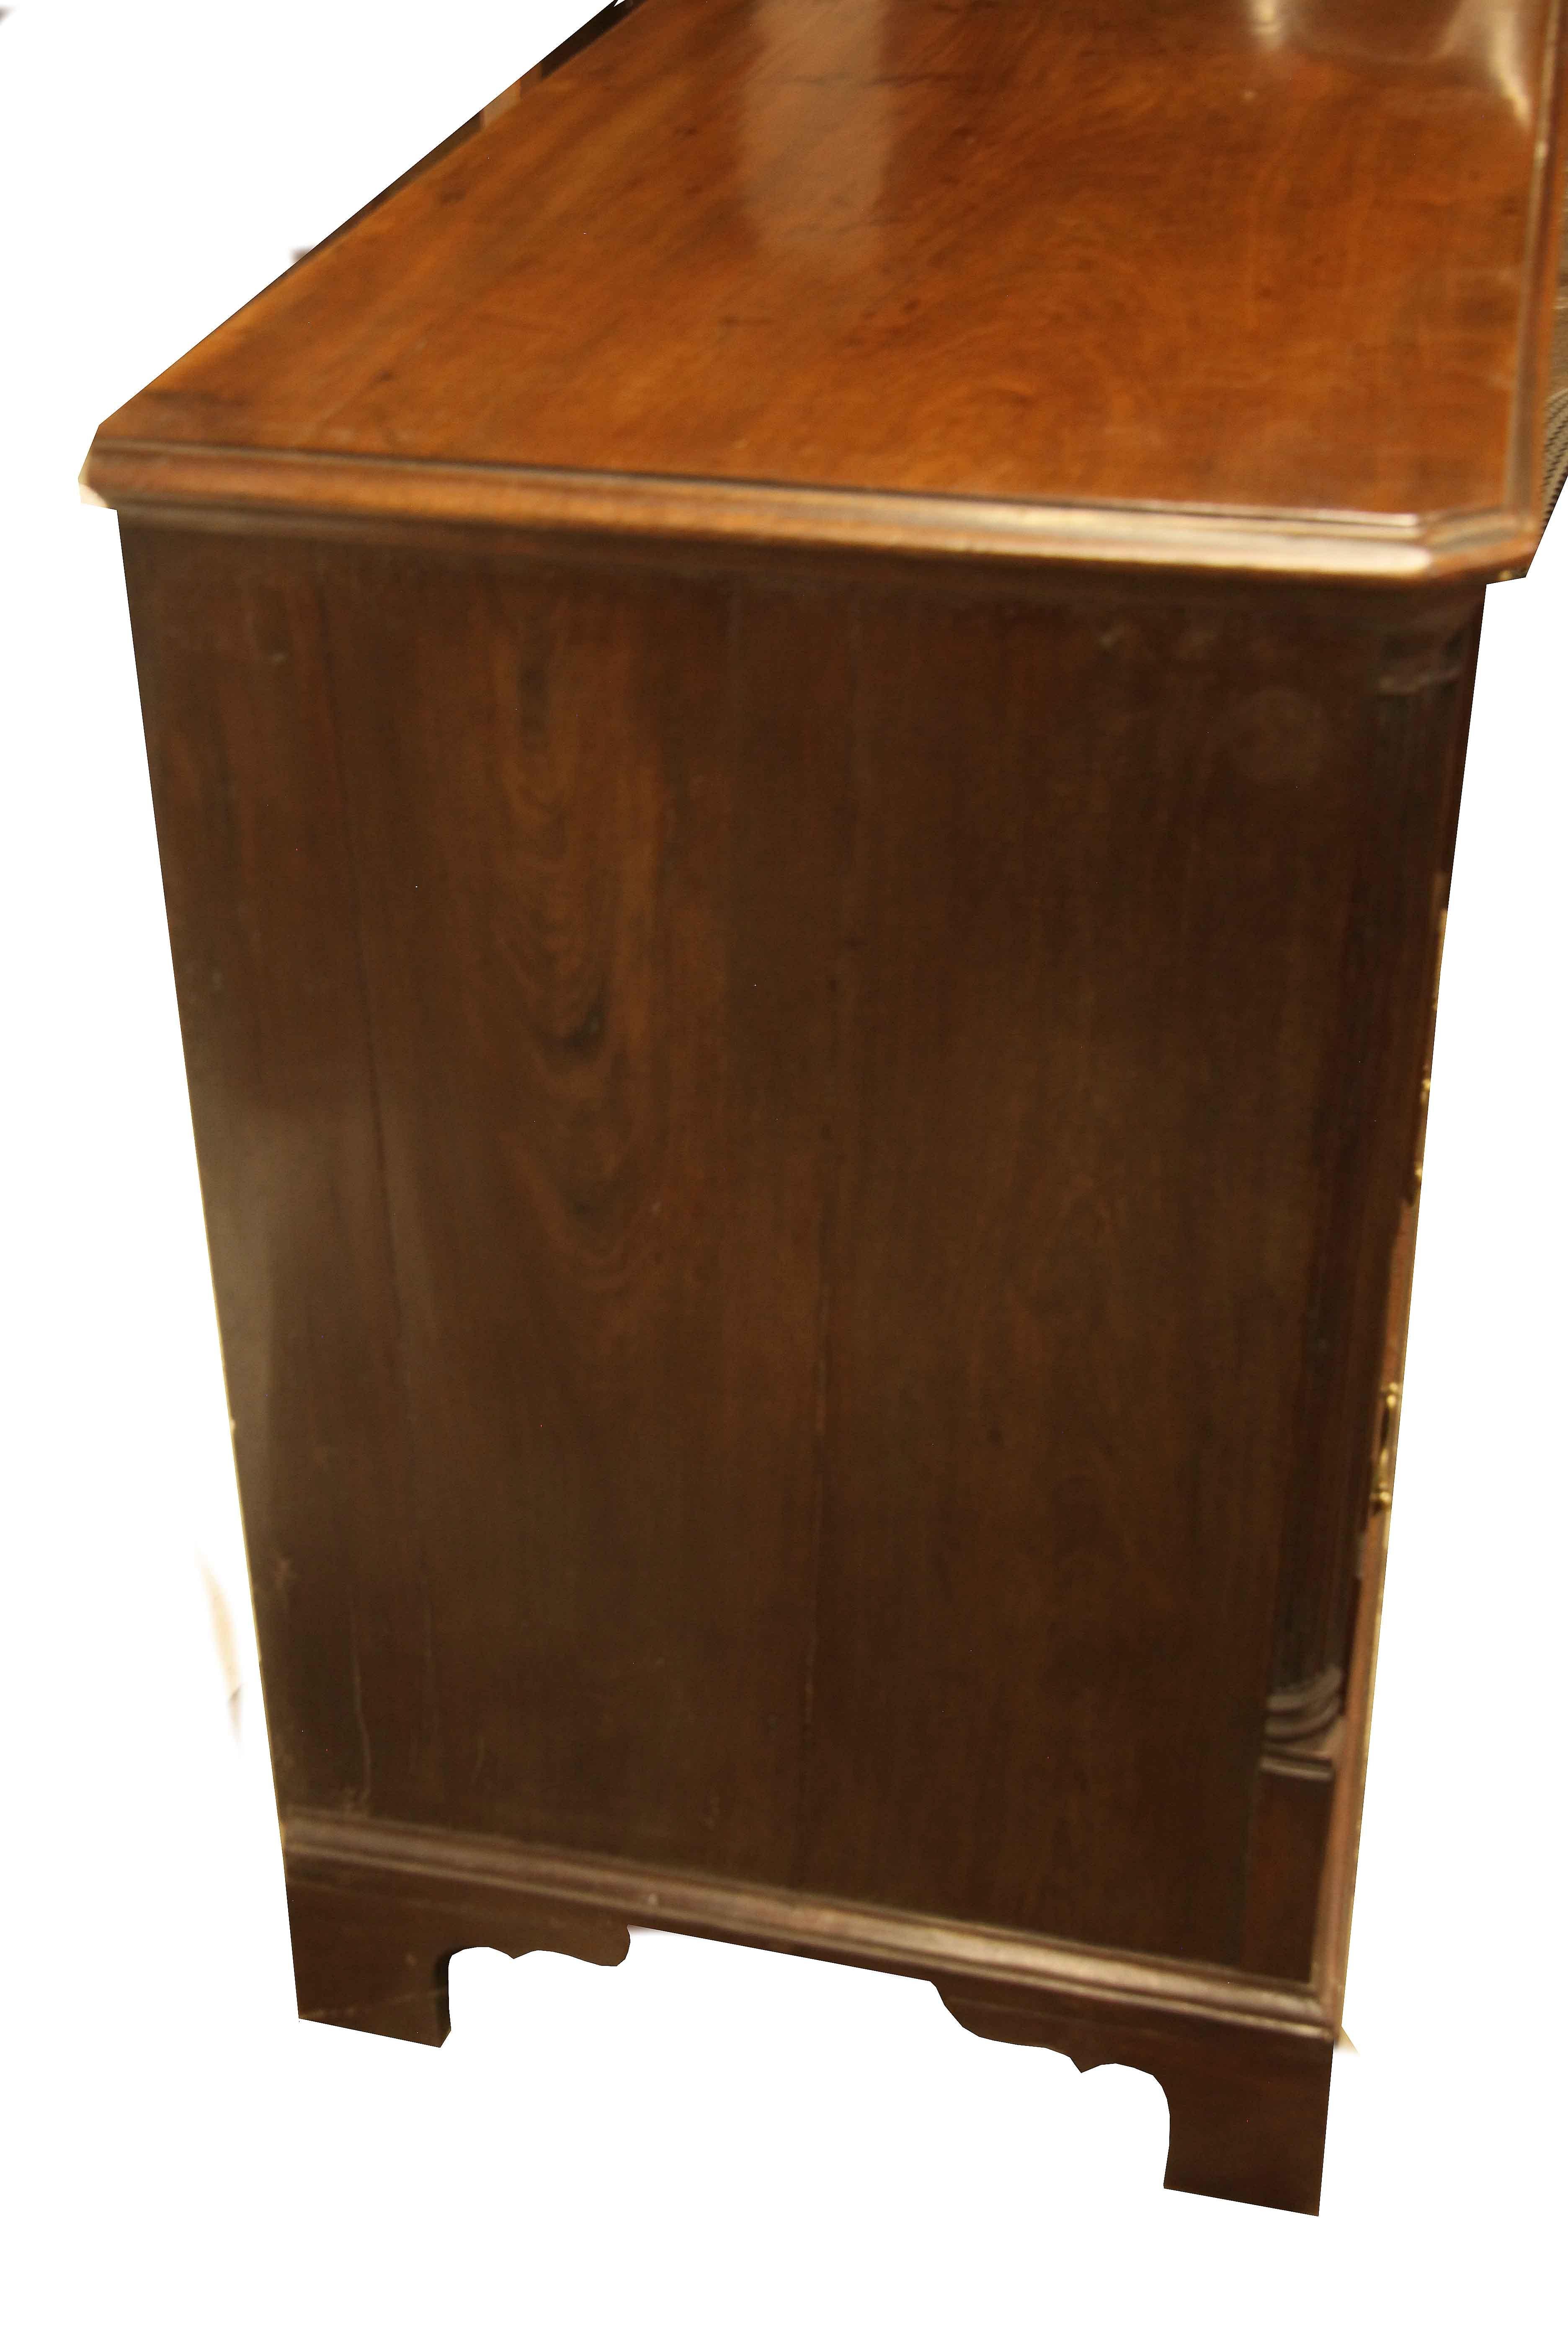 George III Mahogany Chest, the top has a beautiful faded color and patina with canted front corners above a convex reeded quarter column. The two over four graduated drawers retain their original swan neck brass pulls, with pine secondary wood. This